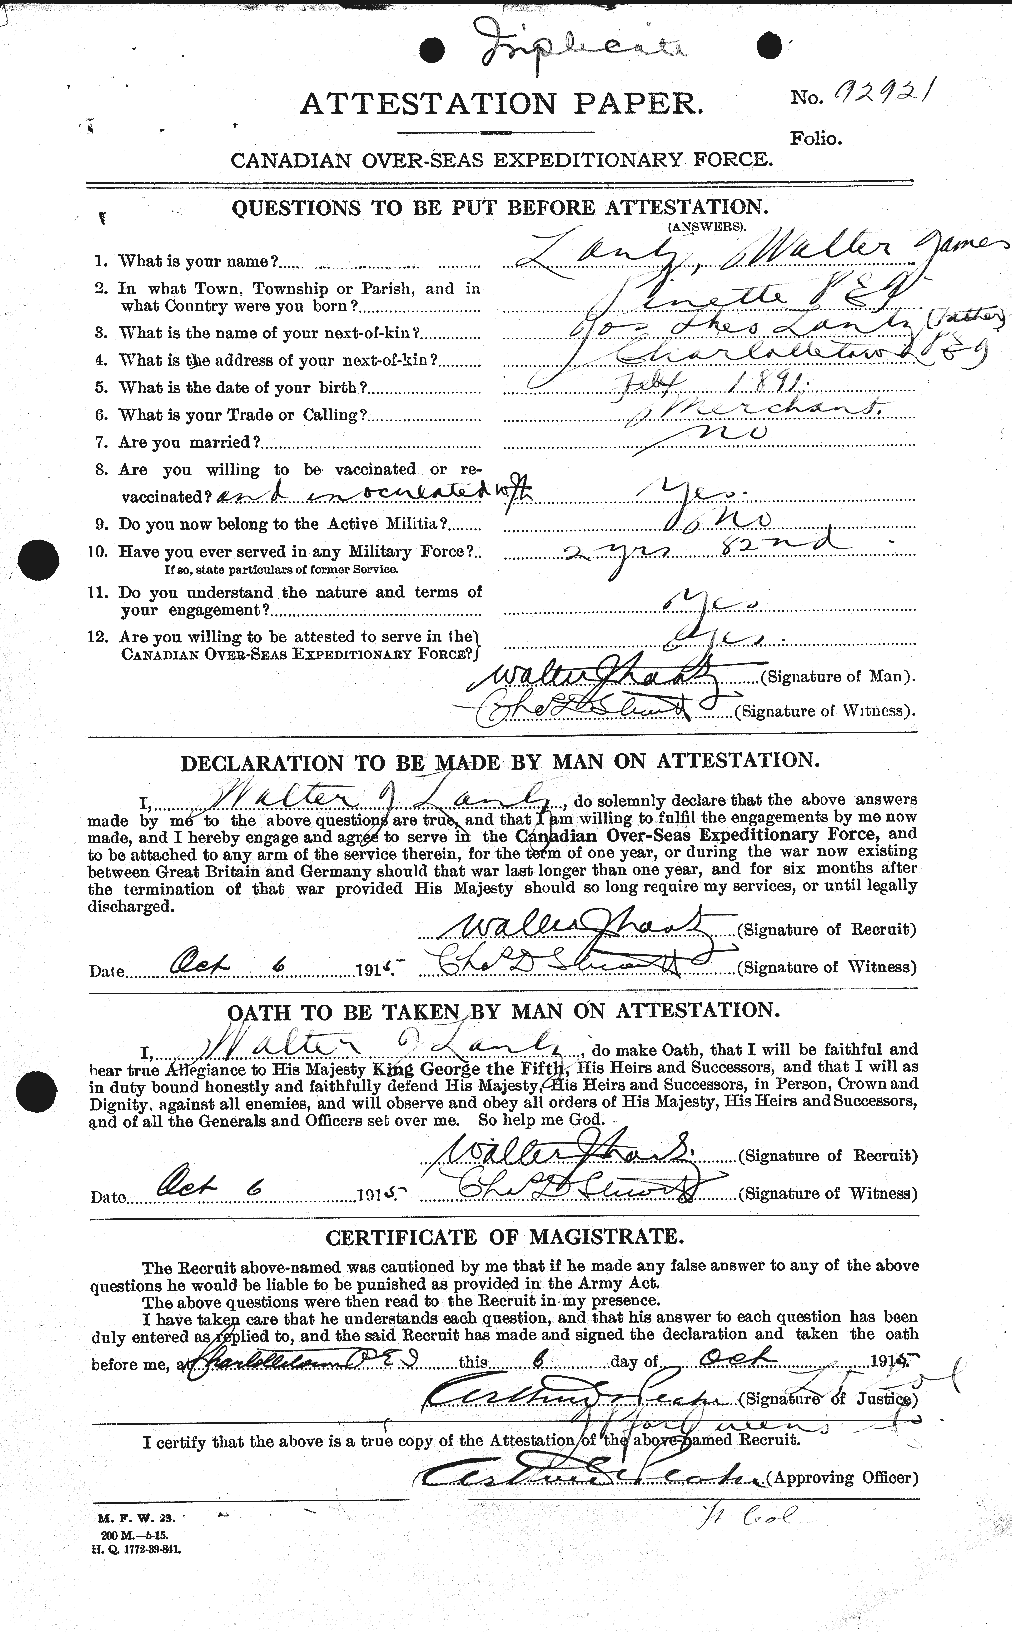 Personnel Records of the First World War - CEF 449681a